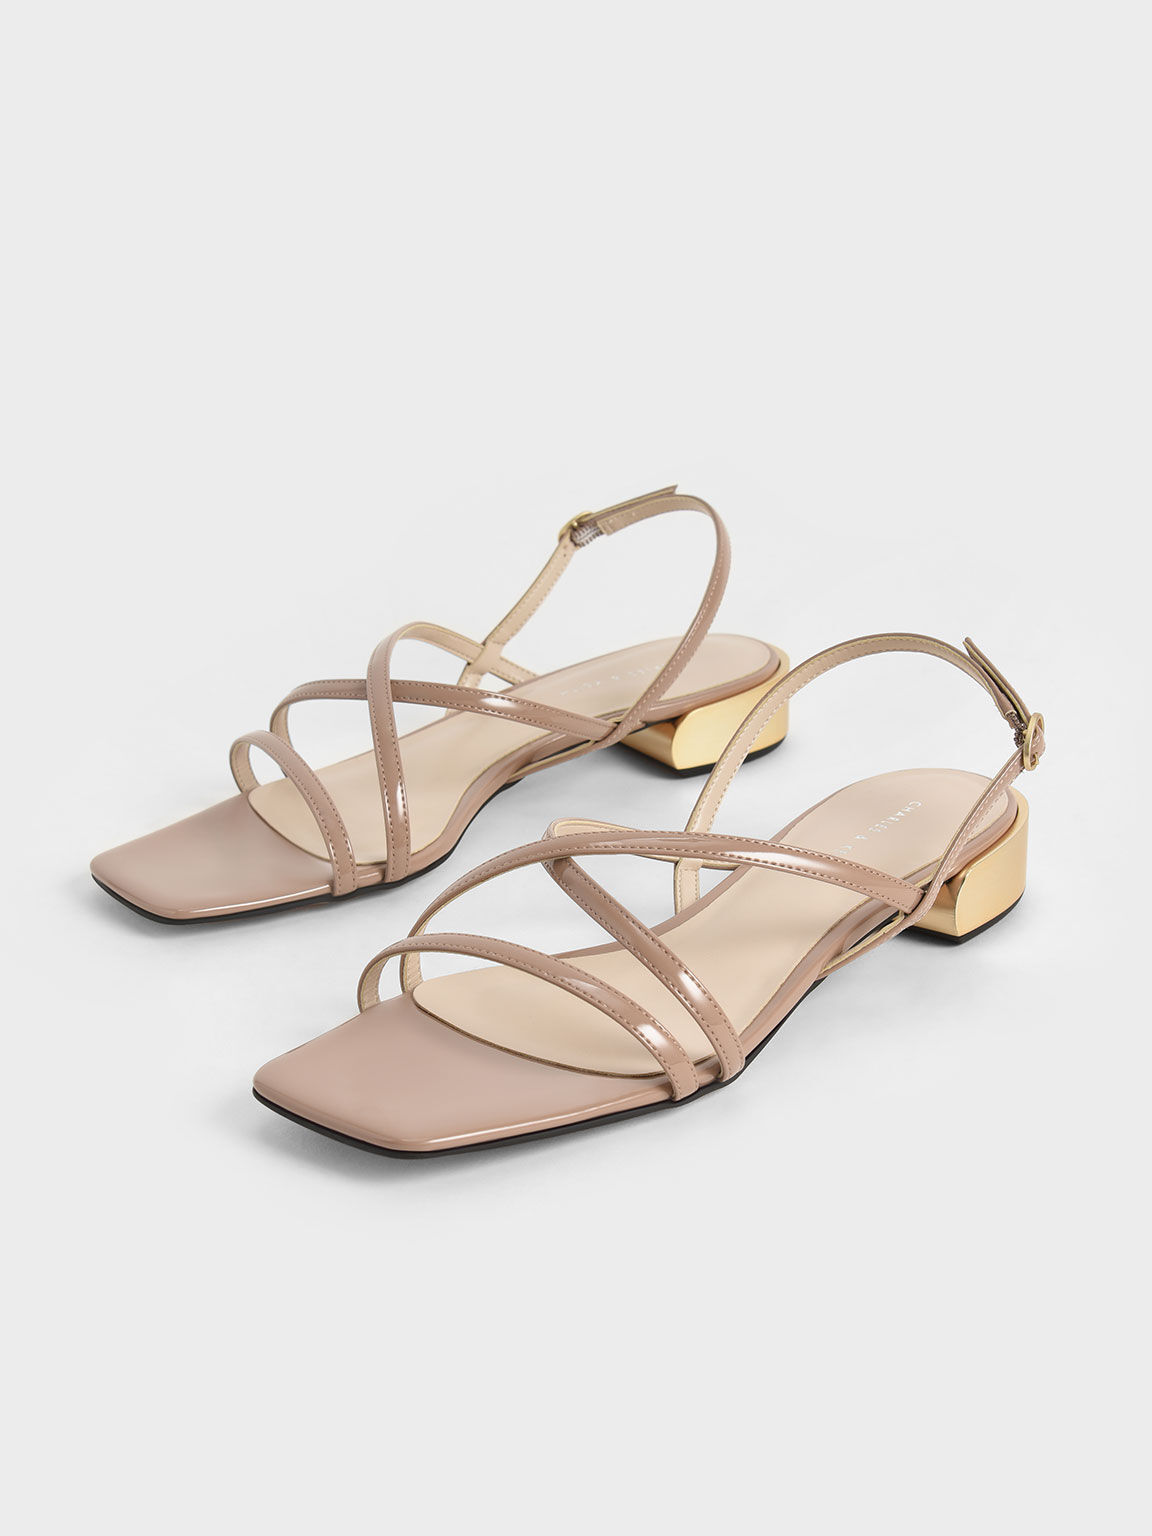 Patent Strappy Slingback Sandals, Nude, hi-res